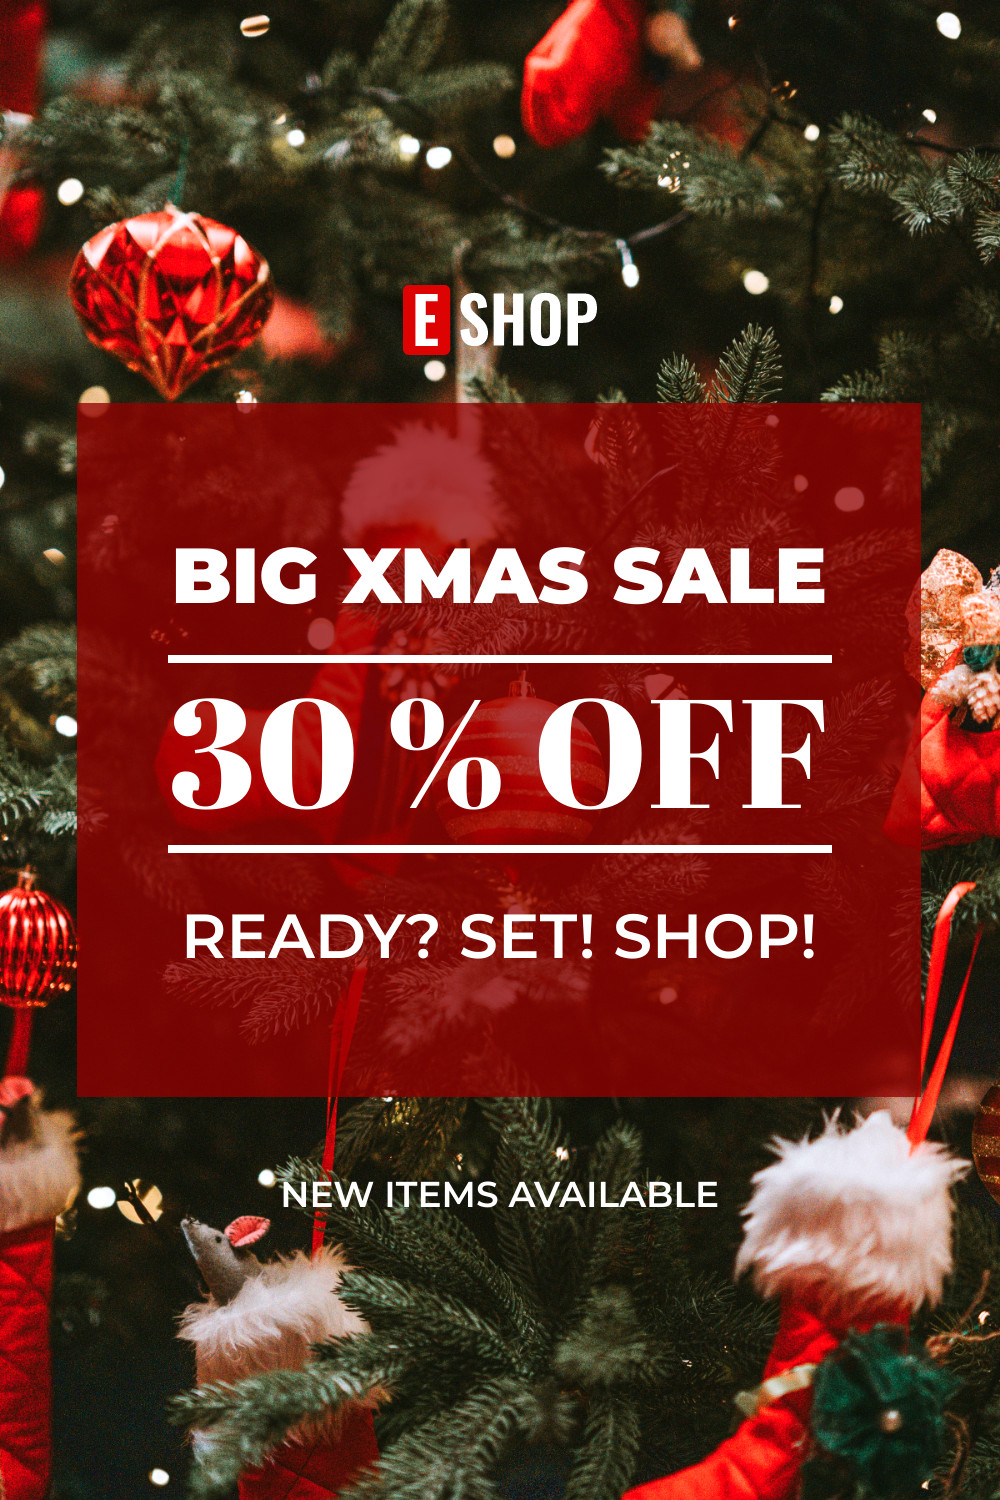 Big Christmas Sale New Items Facebook Cover 820x360